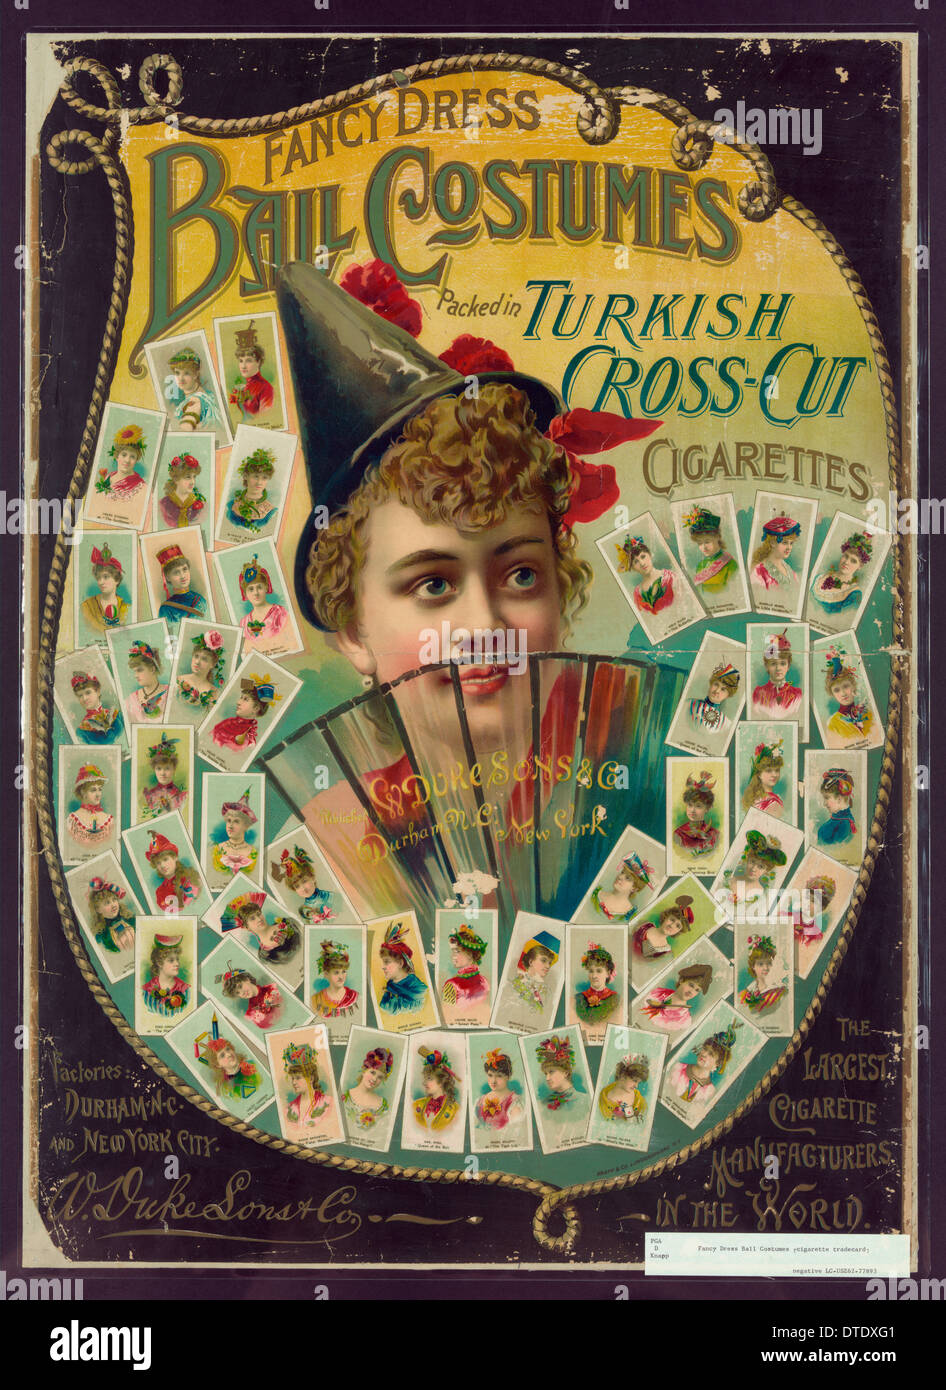 Fancy dress ball costumes, trade card for tobacco manufacturers, circa 1880 Stock Photo